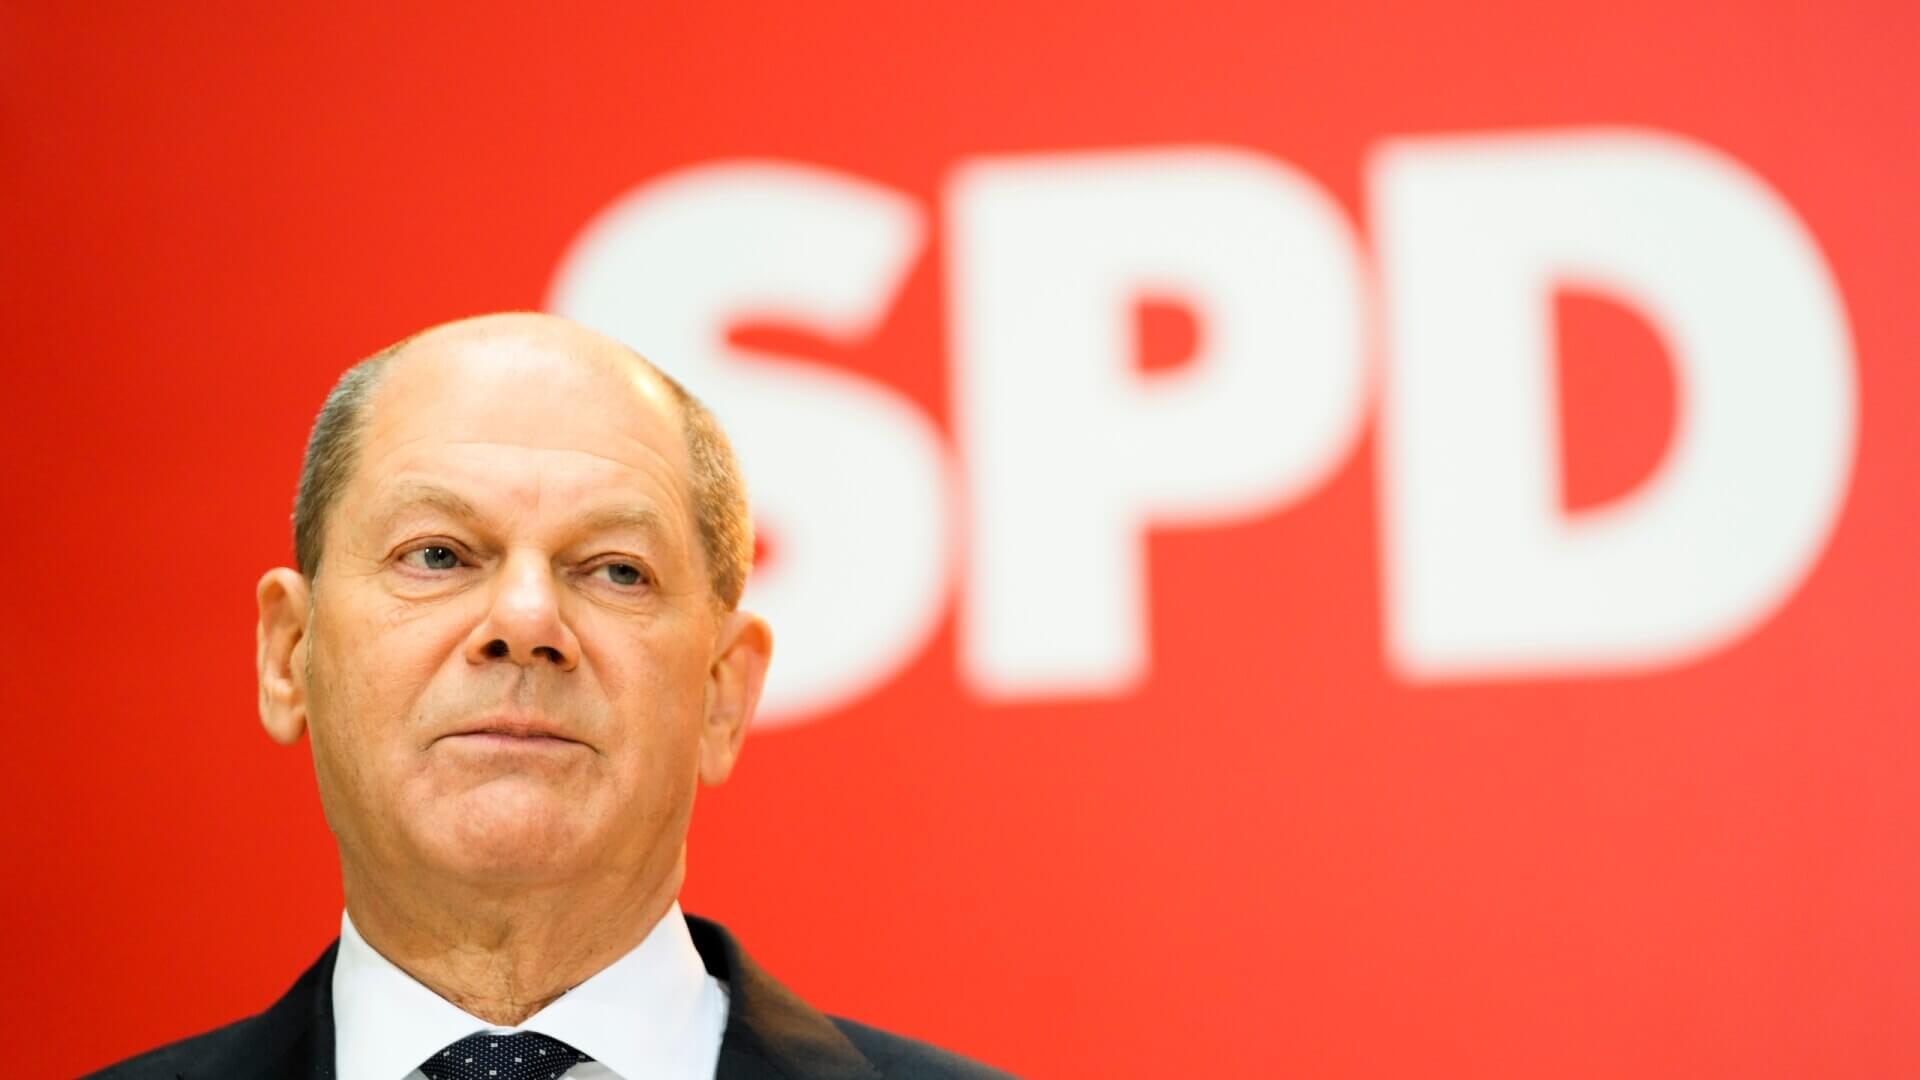 Incoming German Chancellor Scholz Warns Russia Over Ukraine, Avoids Discussing China